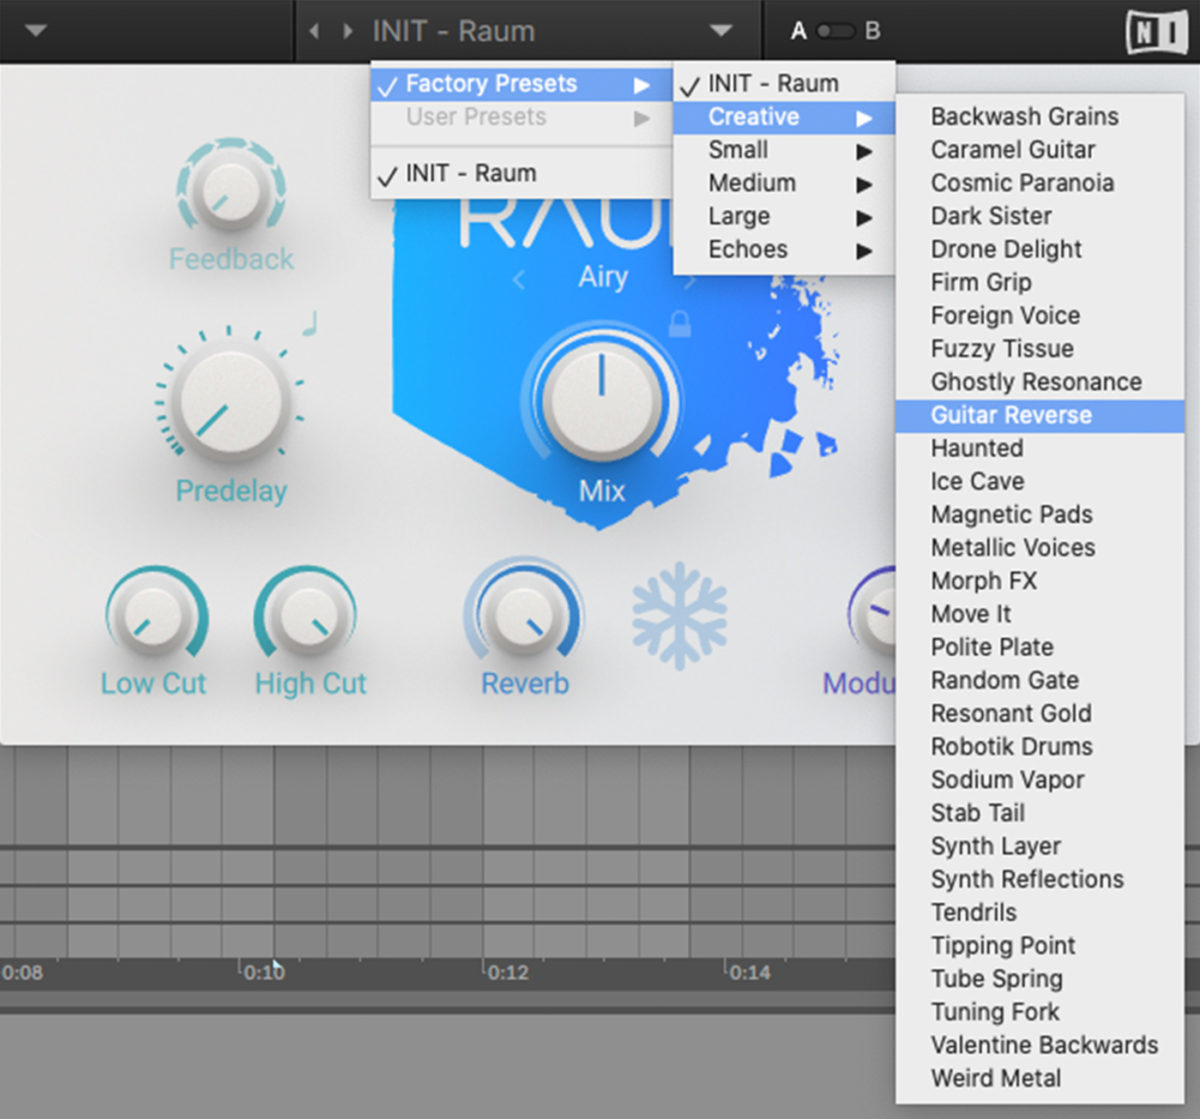 Applying a reverb effect with RAUM